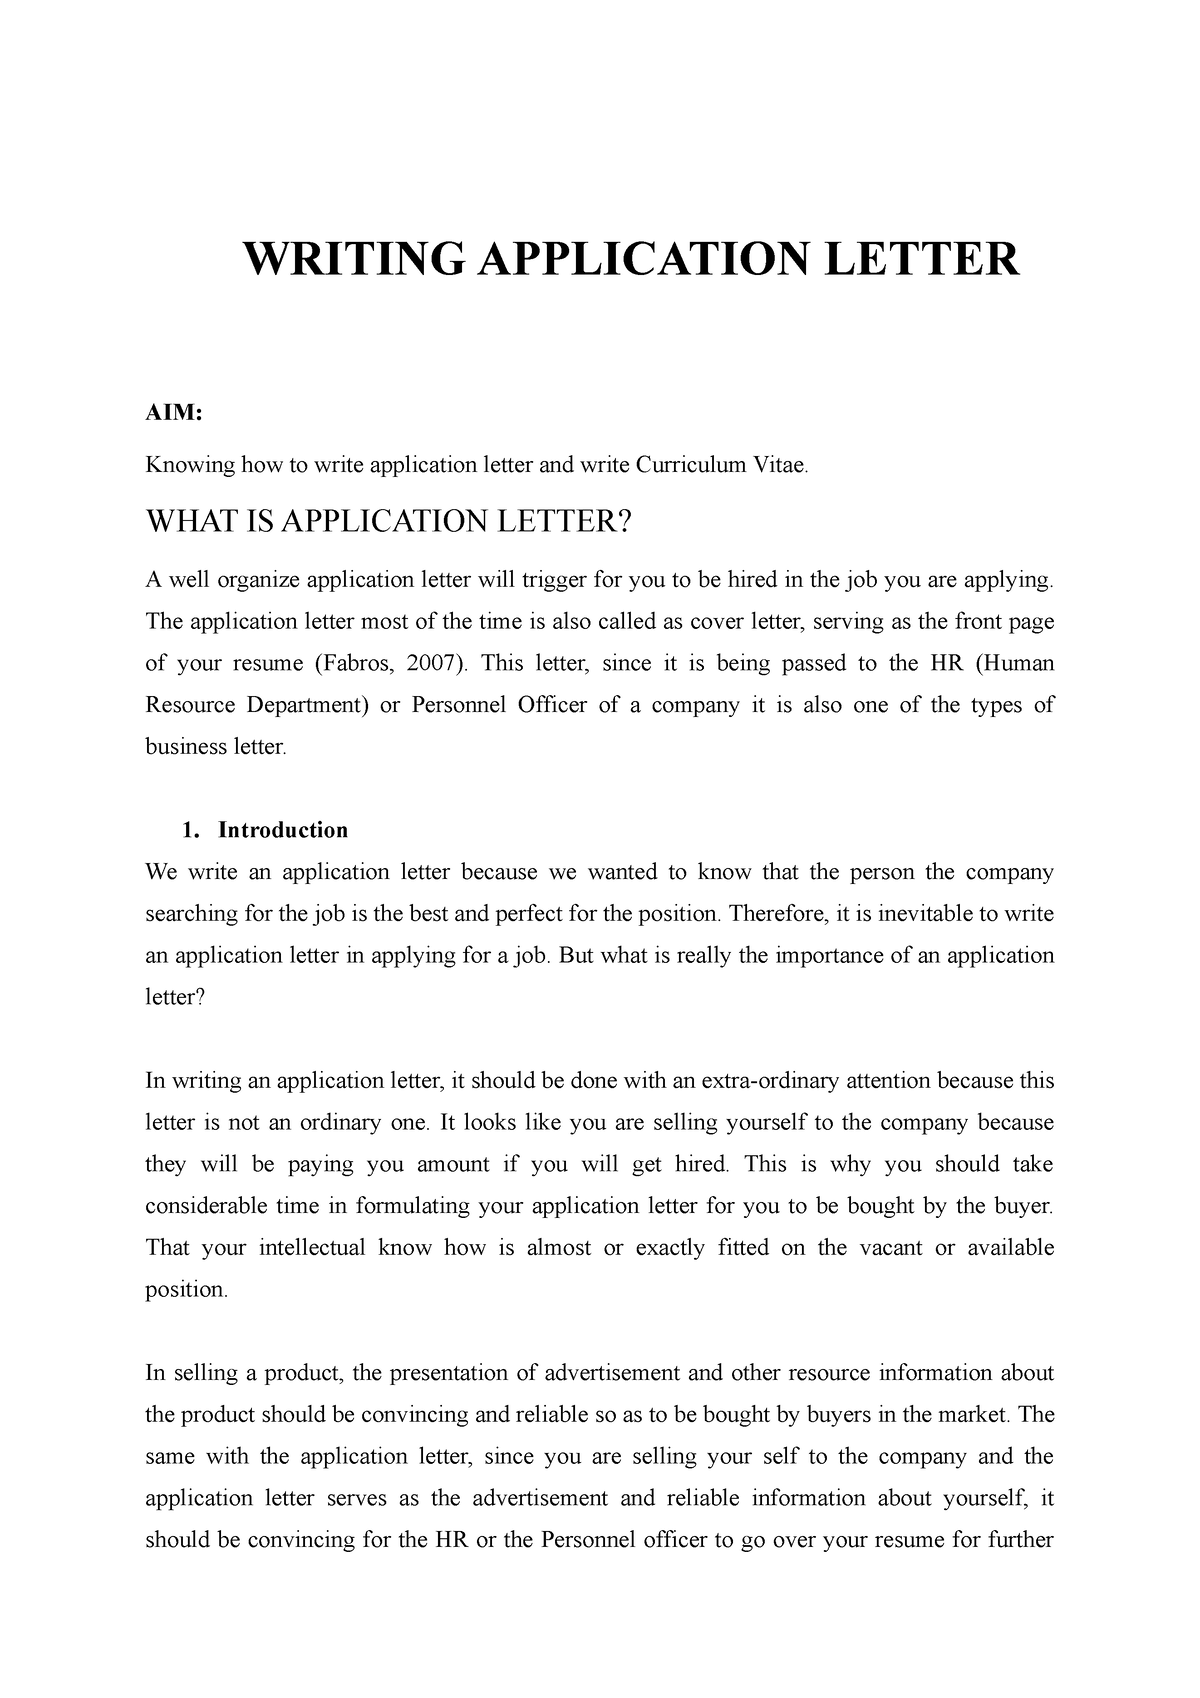 3 features of application letter